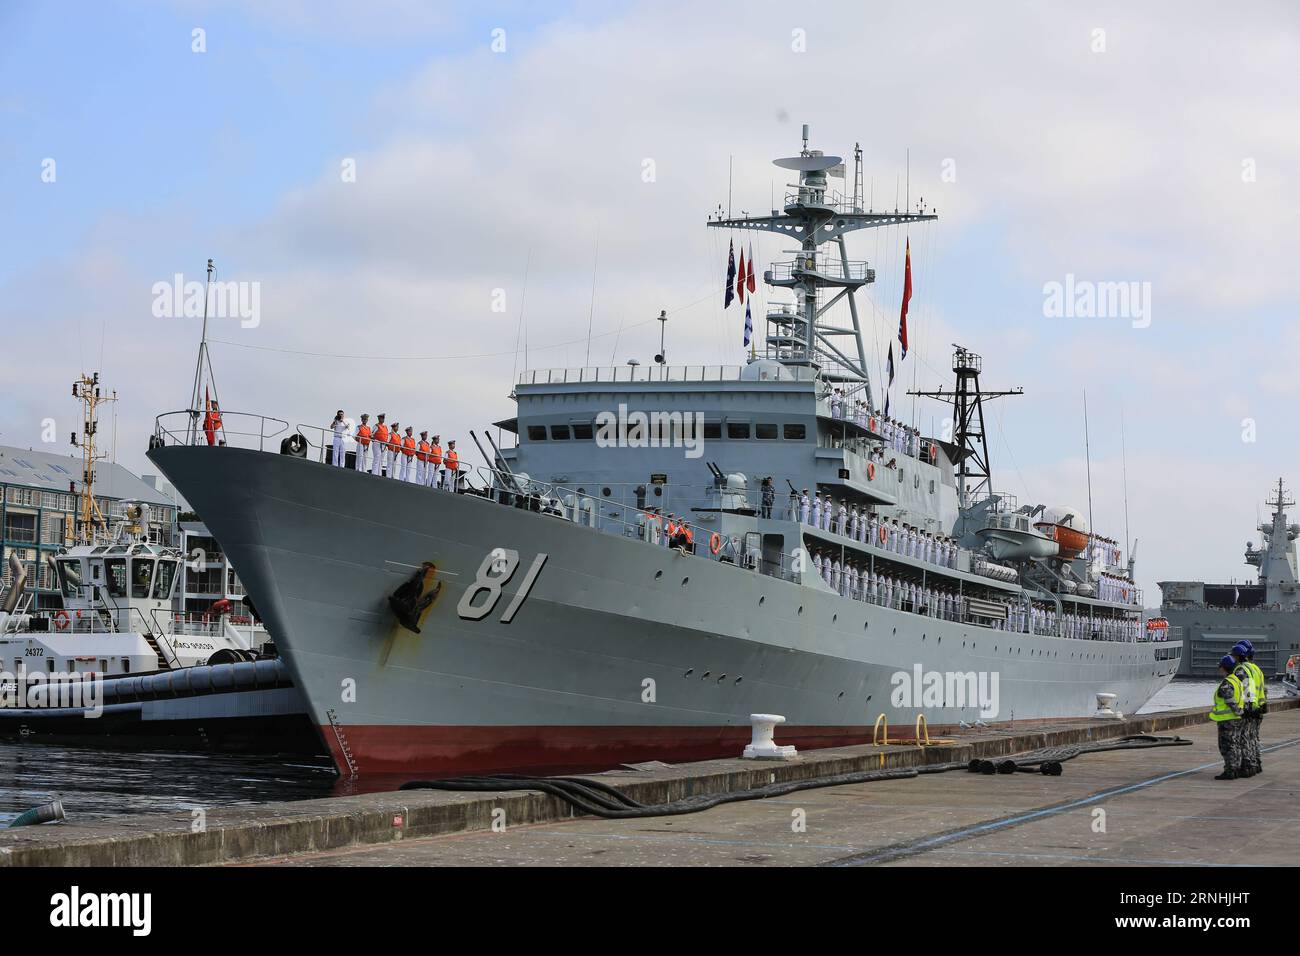 (161123) -- SYDNEY, Nov. 23, 2016 -- Chinese naval training ship Zheng He docks at the Garden Island naval base in Sydney, Australia, Nov. 23, 2016. Chinese naval training ship Zheng He arrived at Sydney Harbor on Wednesday for a four-day stop, as part of its latest 68-day training exchange and goodwill voyage. ) (zjy) AUSTRALIA-SYDNEY-CHINESE NAVAL TRAINING SHIP-ARRIVAL ZhuxHongye PUBLICATIONxNOTxINxCHN   Sydney Nov 23 2016 Chinese Naval Training Ship Zheng he Docks AT The Garden Iceland Naval Base in Sydney Australia Nov 23 2016 Chinese Naval Training Ship Zheng he arrived AT Sydney Harbor O Stock Photo